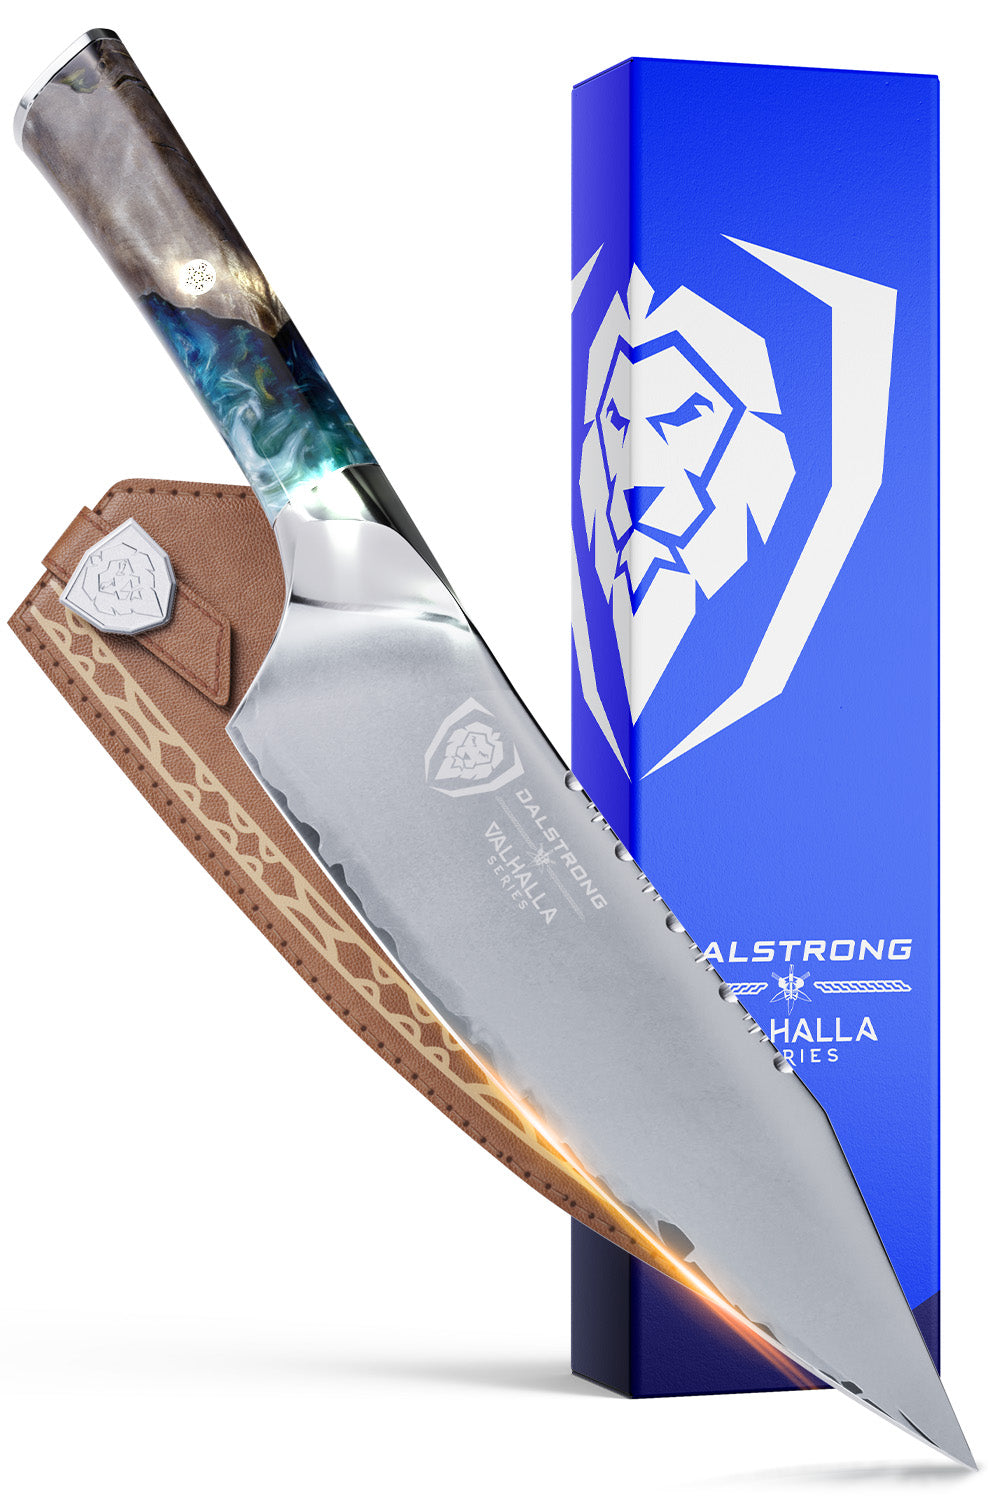 Chef's Knife 8" | Valhalla Series | Dalstrong ©